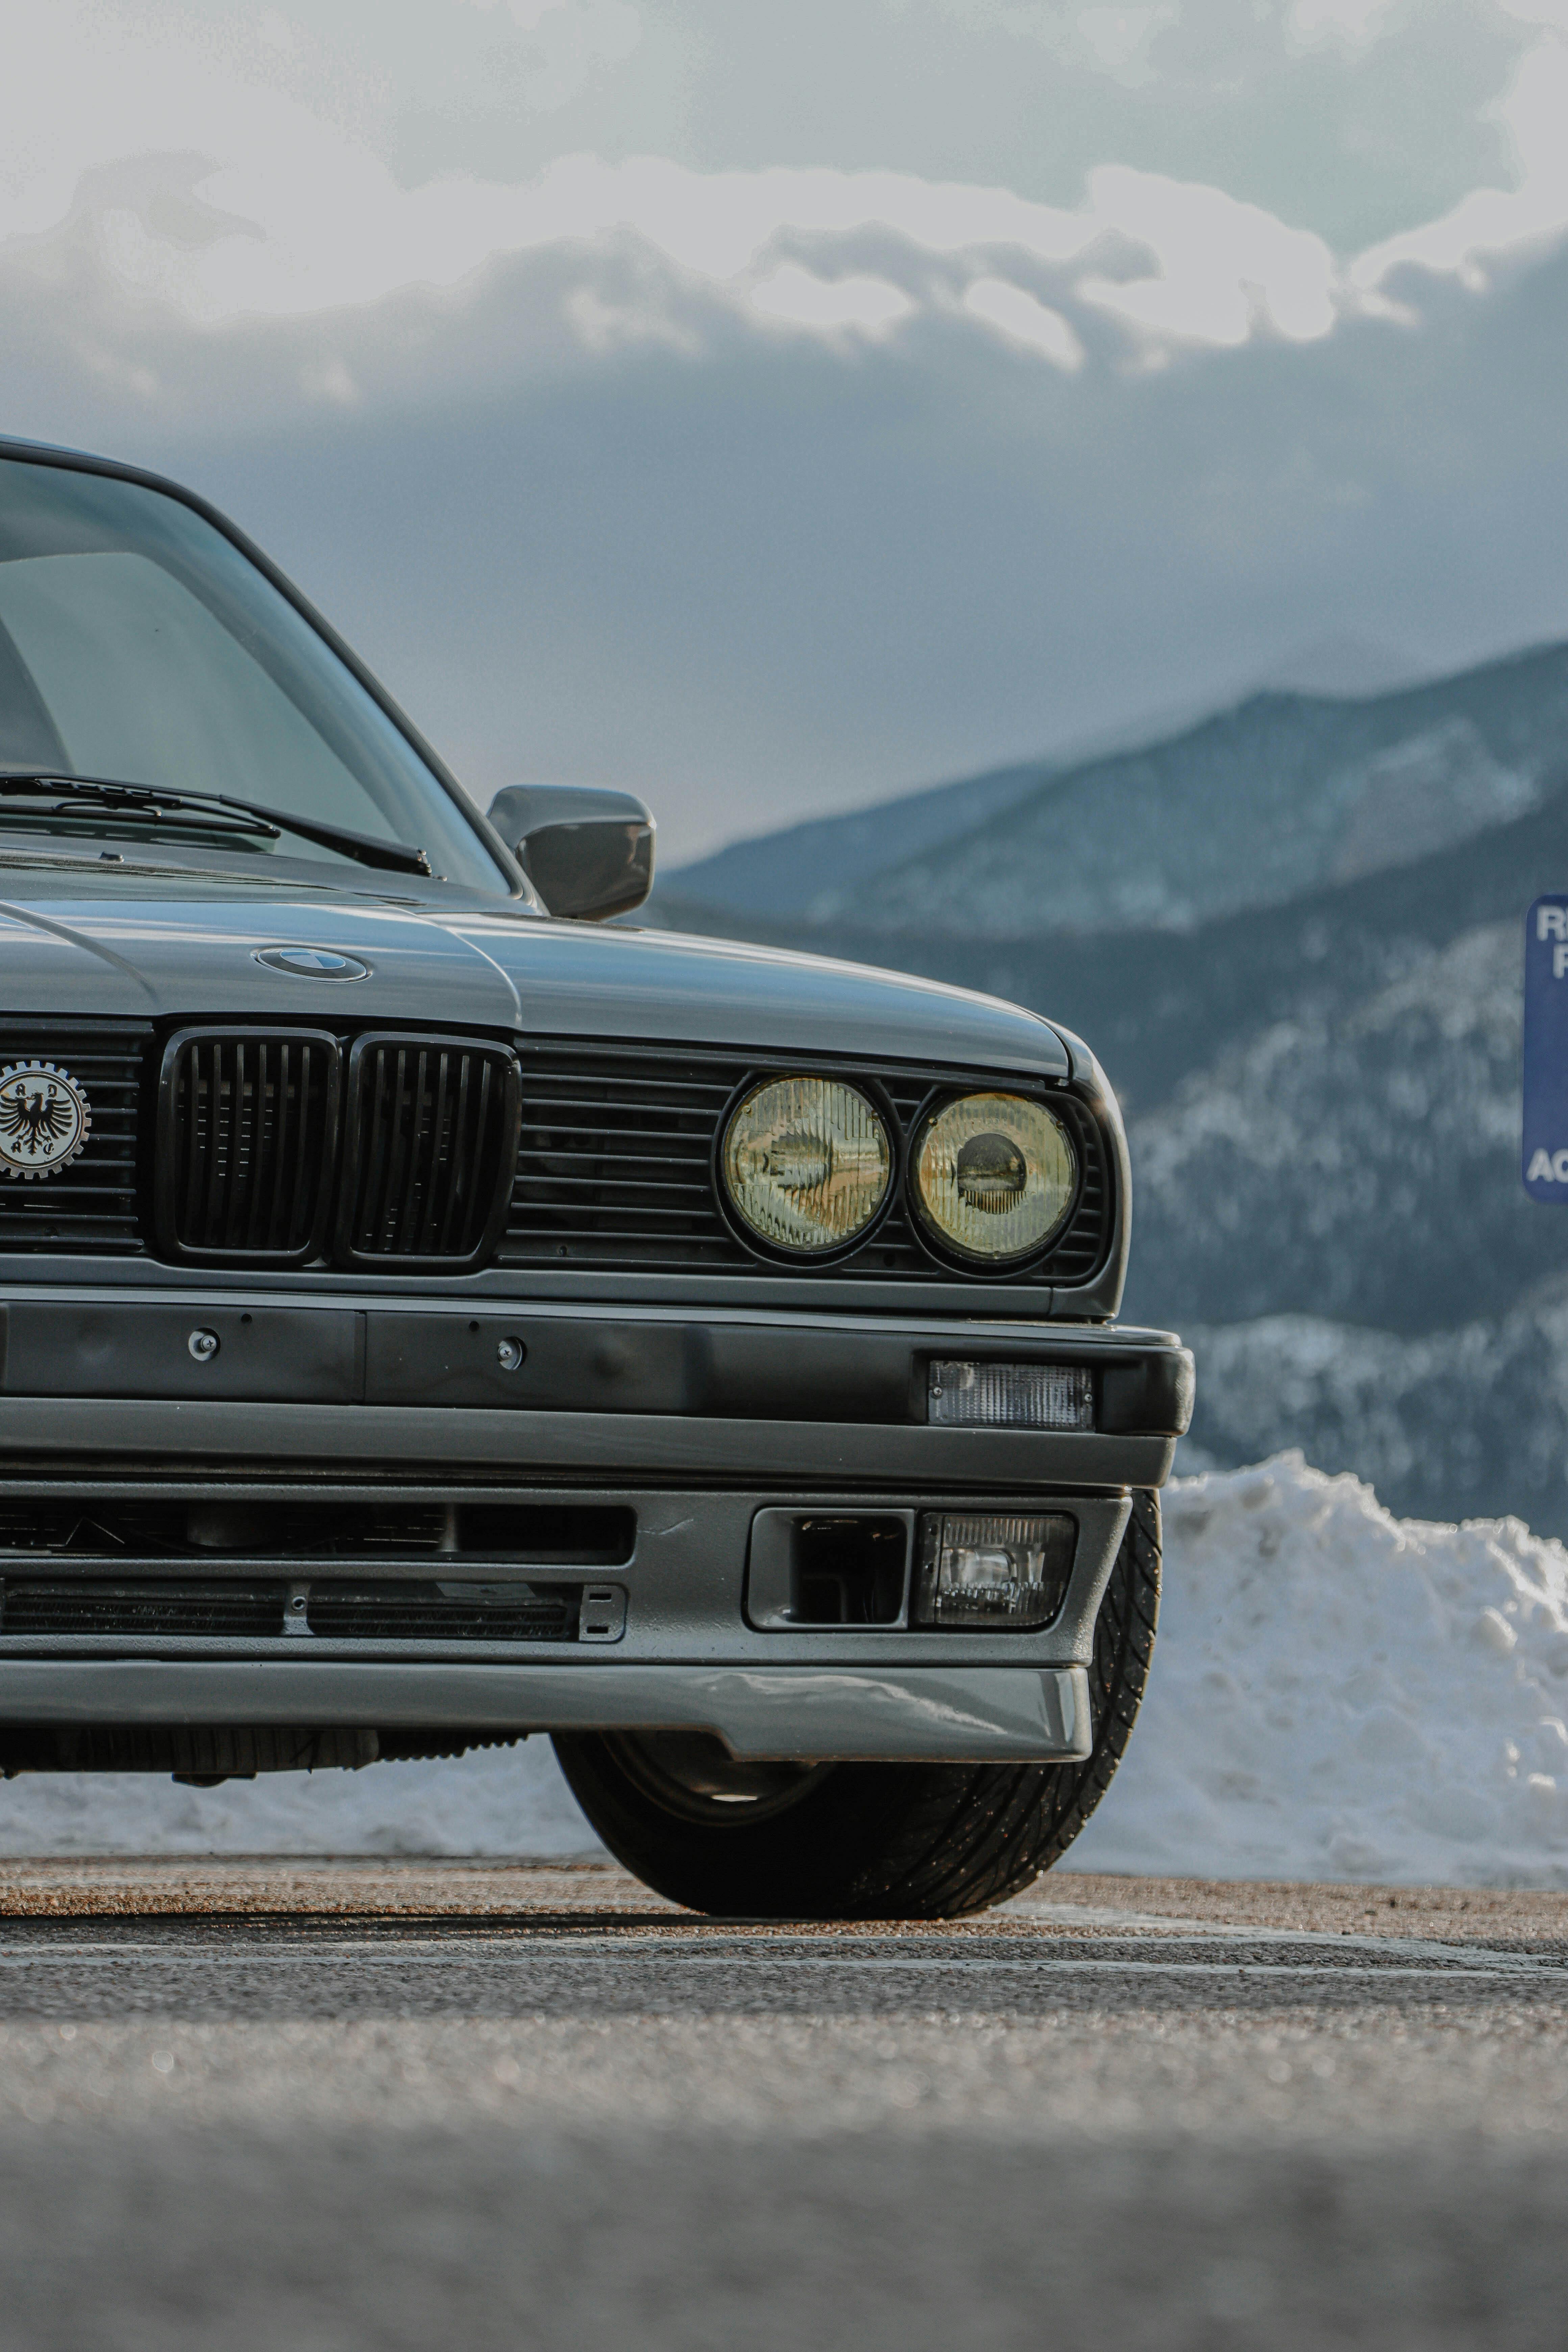 Bmw E30 M3 Driving On The Road Live Wallpaper